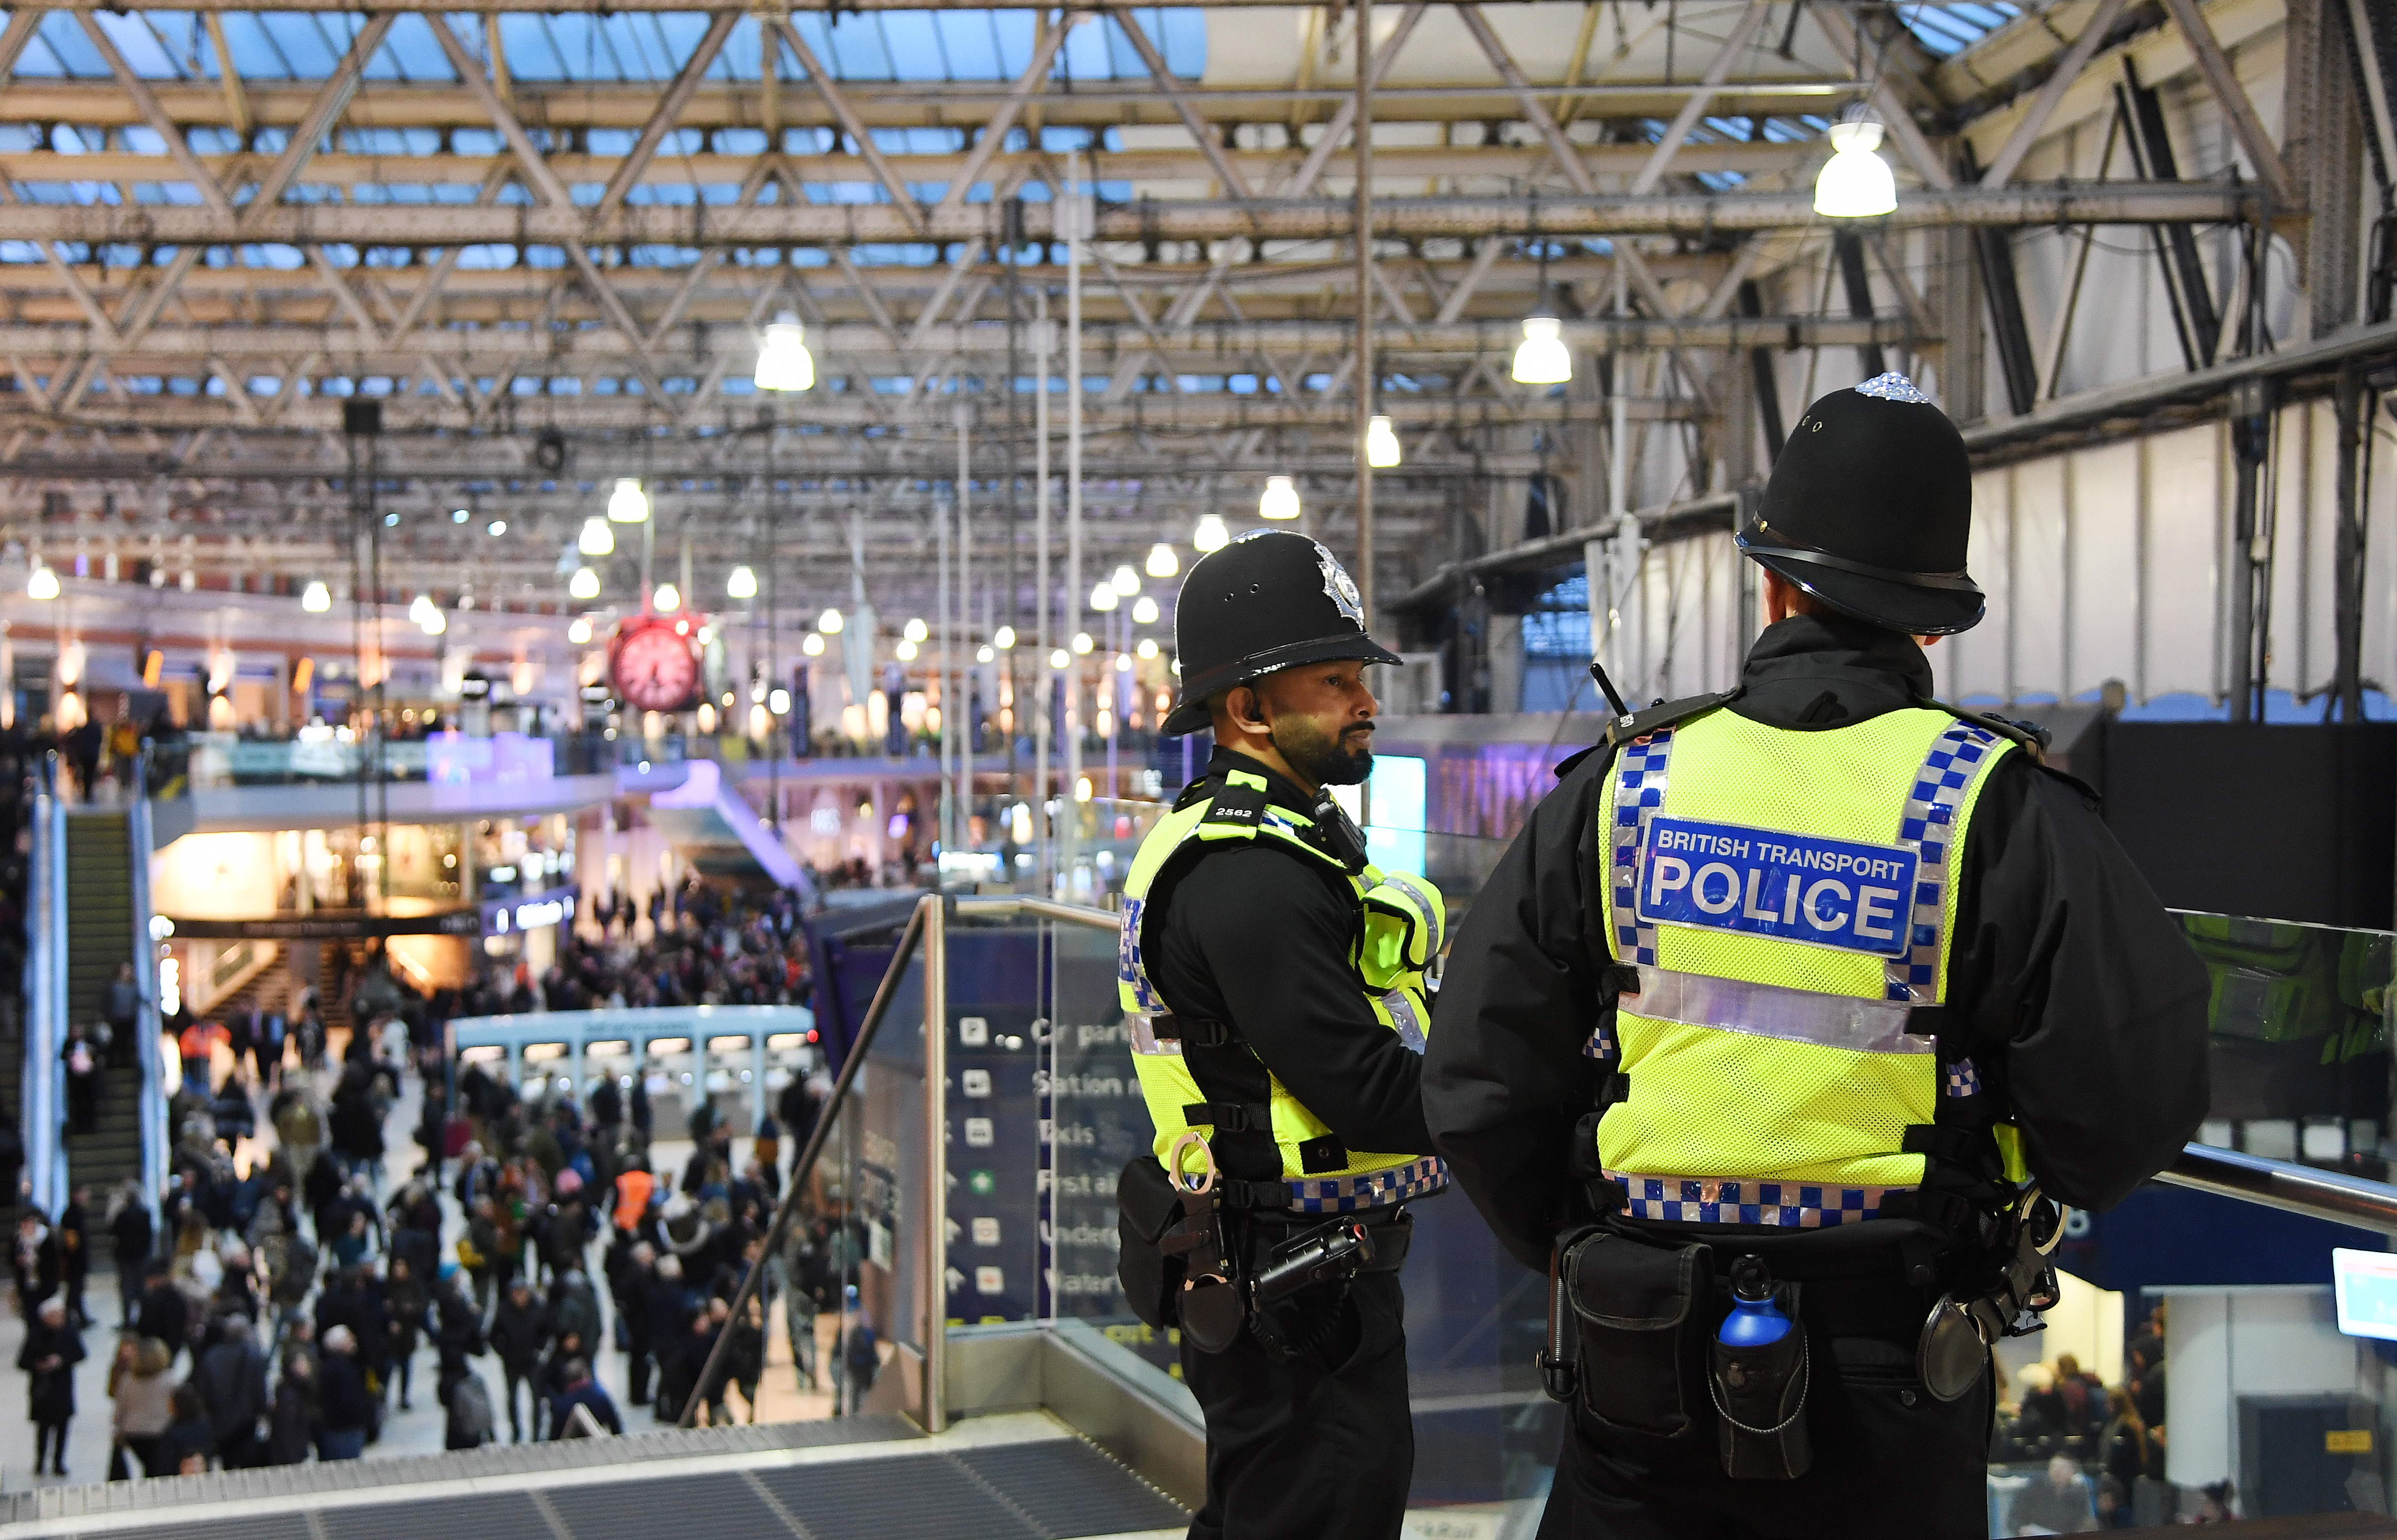 epa07415720 Police at Waterloo Station in London, Britain, 05 March 2019. According to news reports explosive devices have been found by police at three different locations across London.  EPA/ANDY RAIN